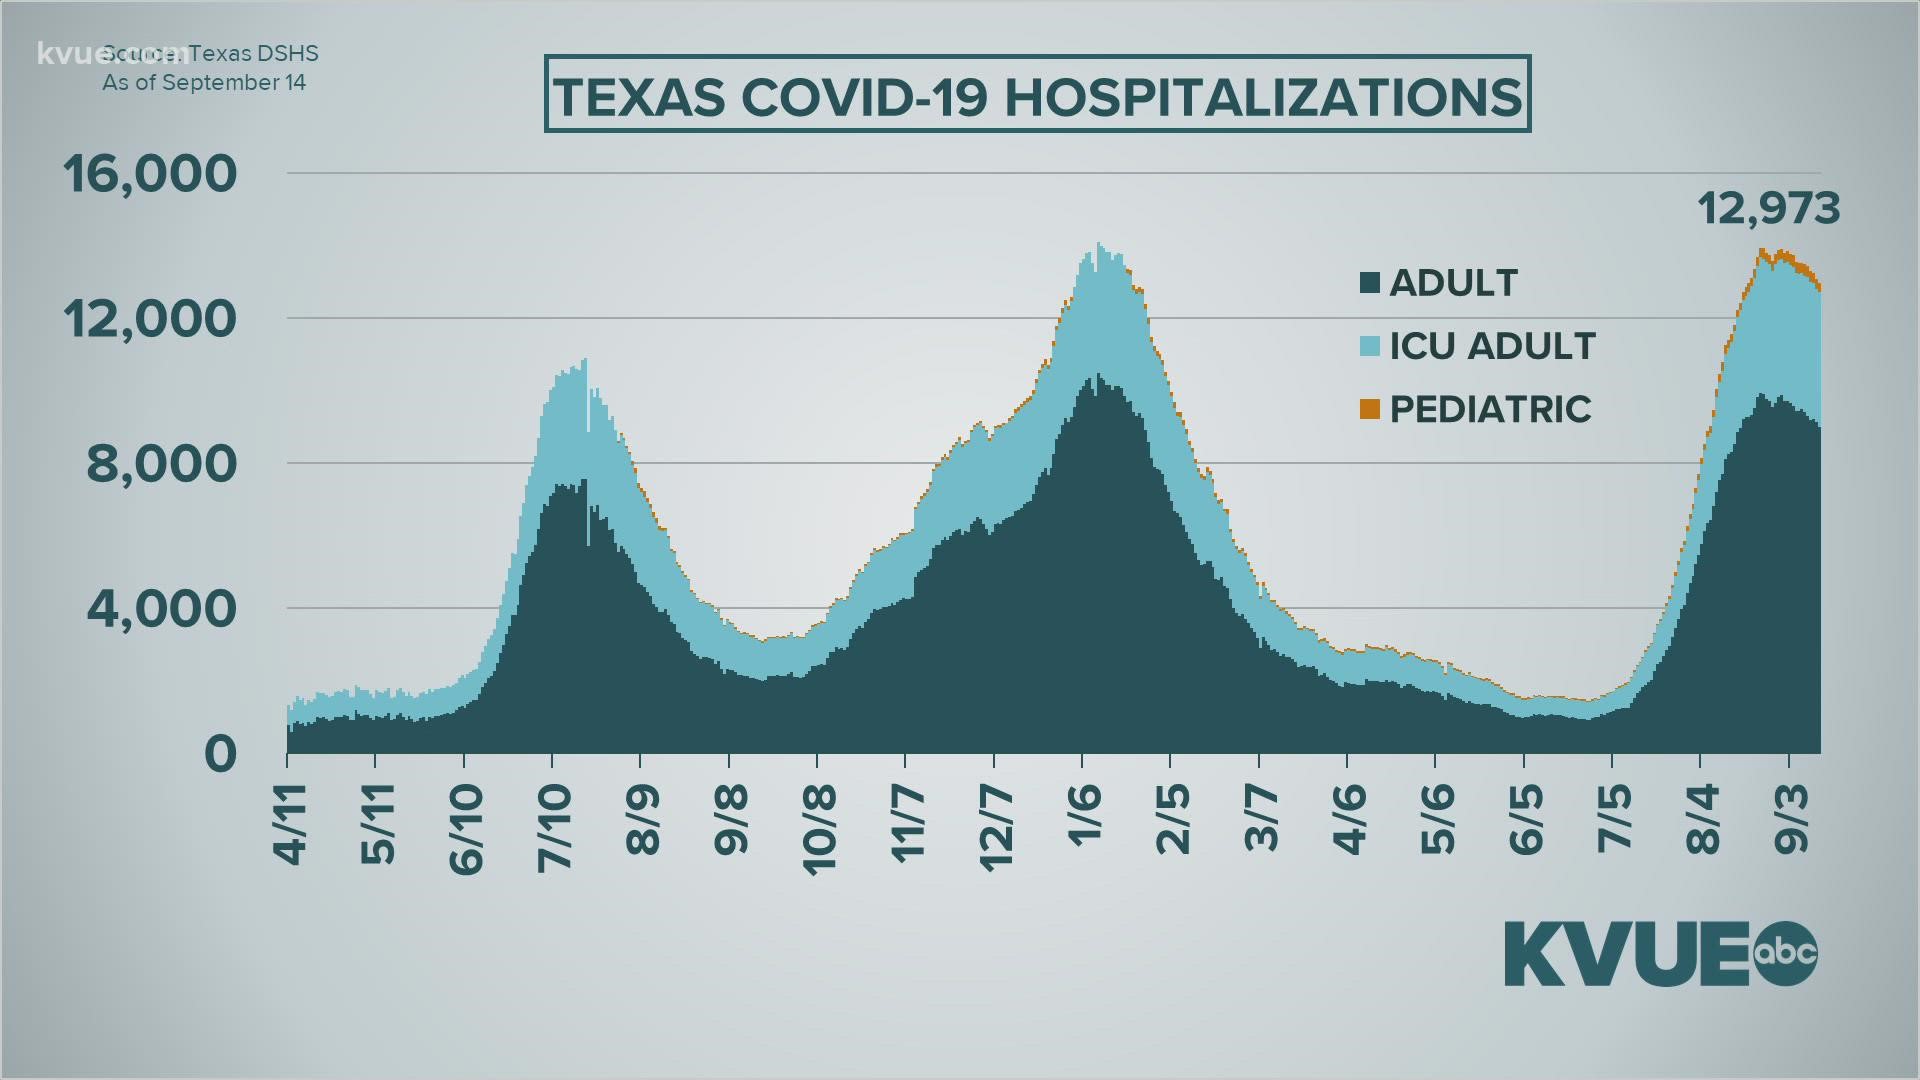 Austin Public Health said the city could move back to Stage 4 of its COVID-19 risk-based guidelines if hospitalizations continue to slow down.